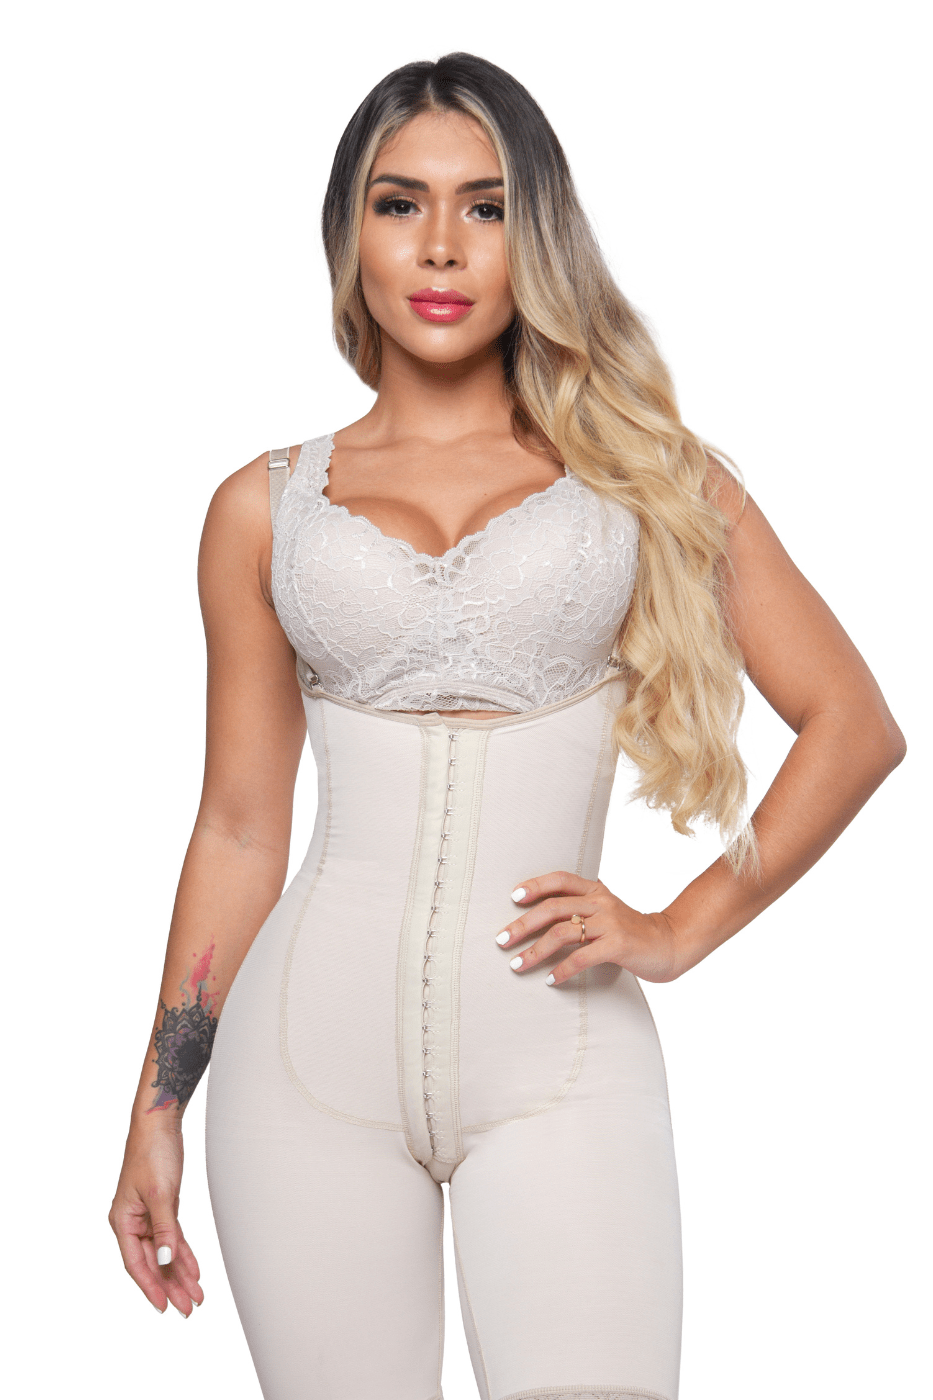 Waist Trainers vs Shapewear: Which is Better?